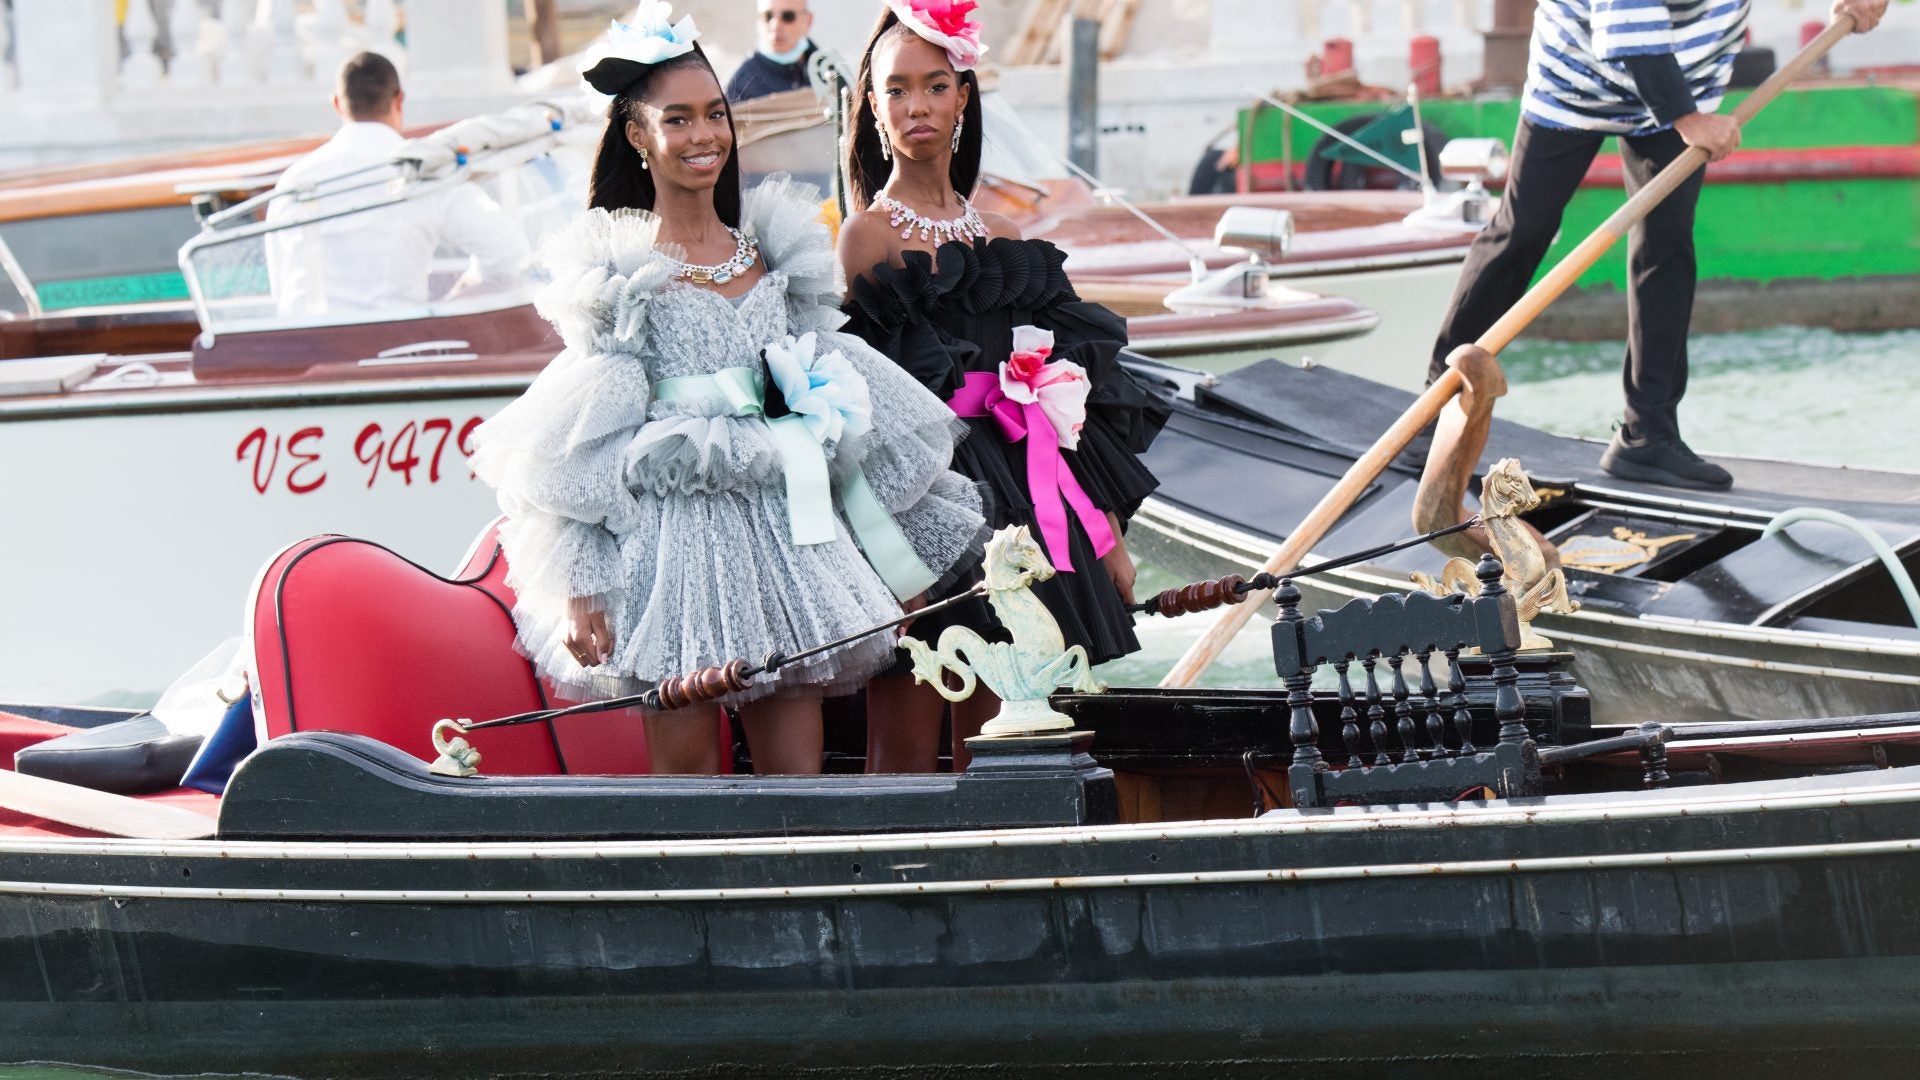 'Baby I See You!' Diddy Felt Kim Porter's Presence In Venice As Their Twins Made Couture Runway Debut